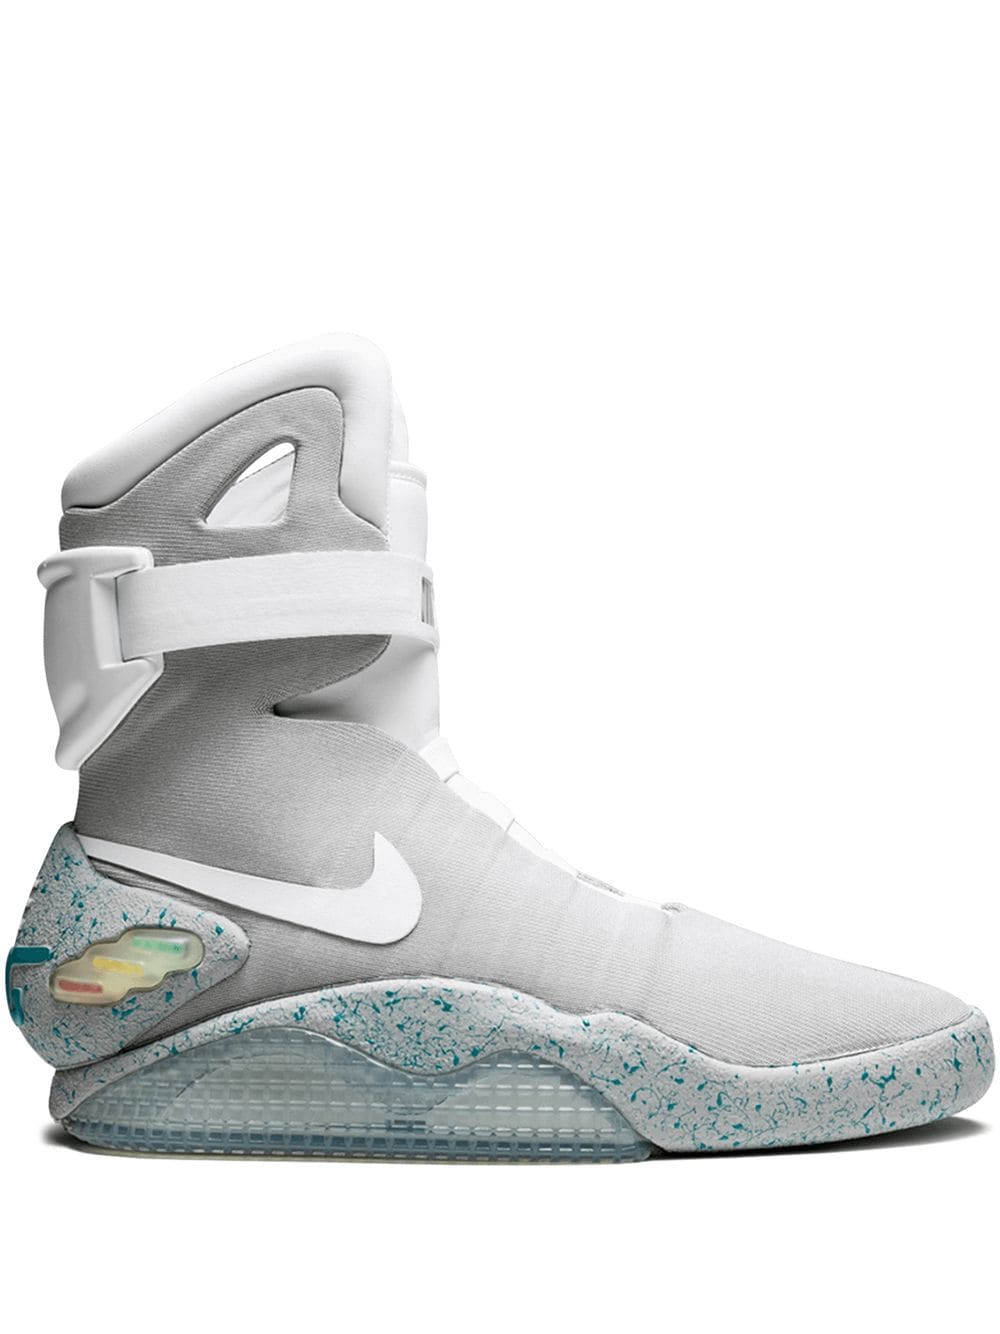 Nike Air Mag "Back to the Future"